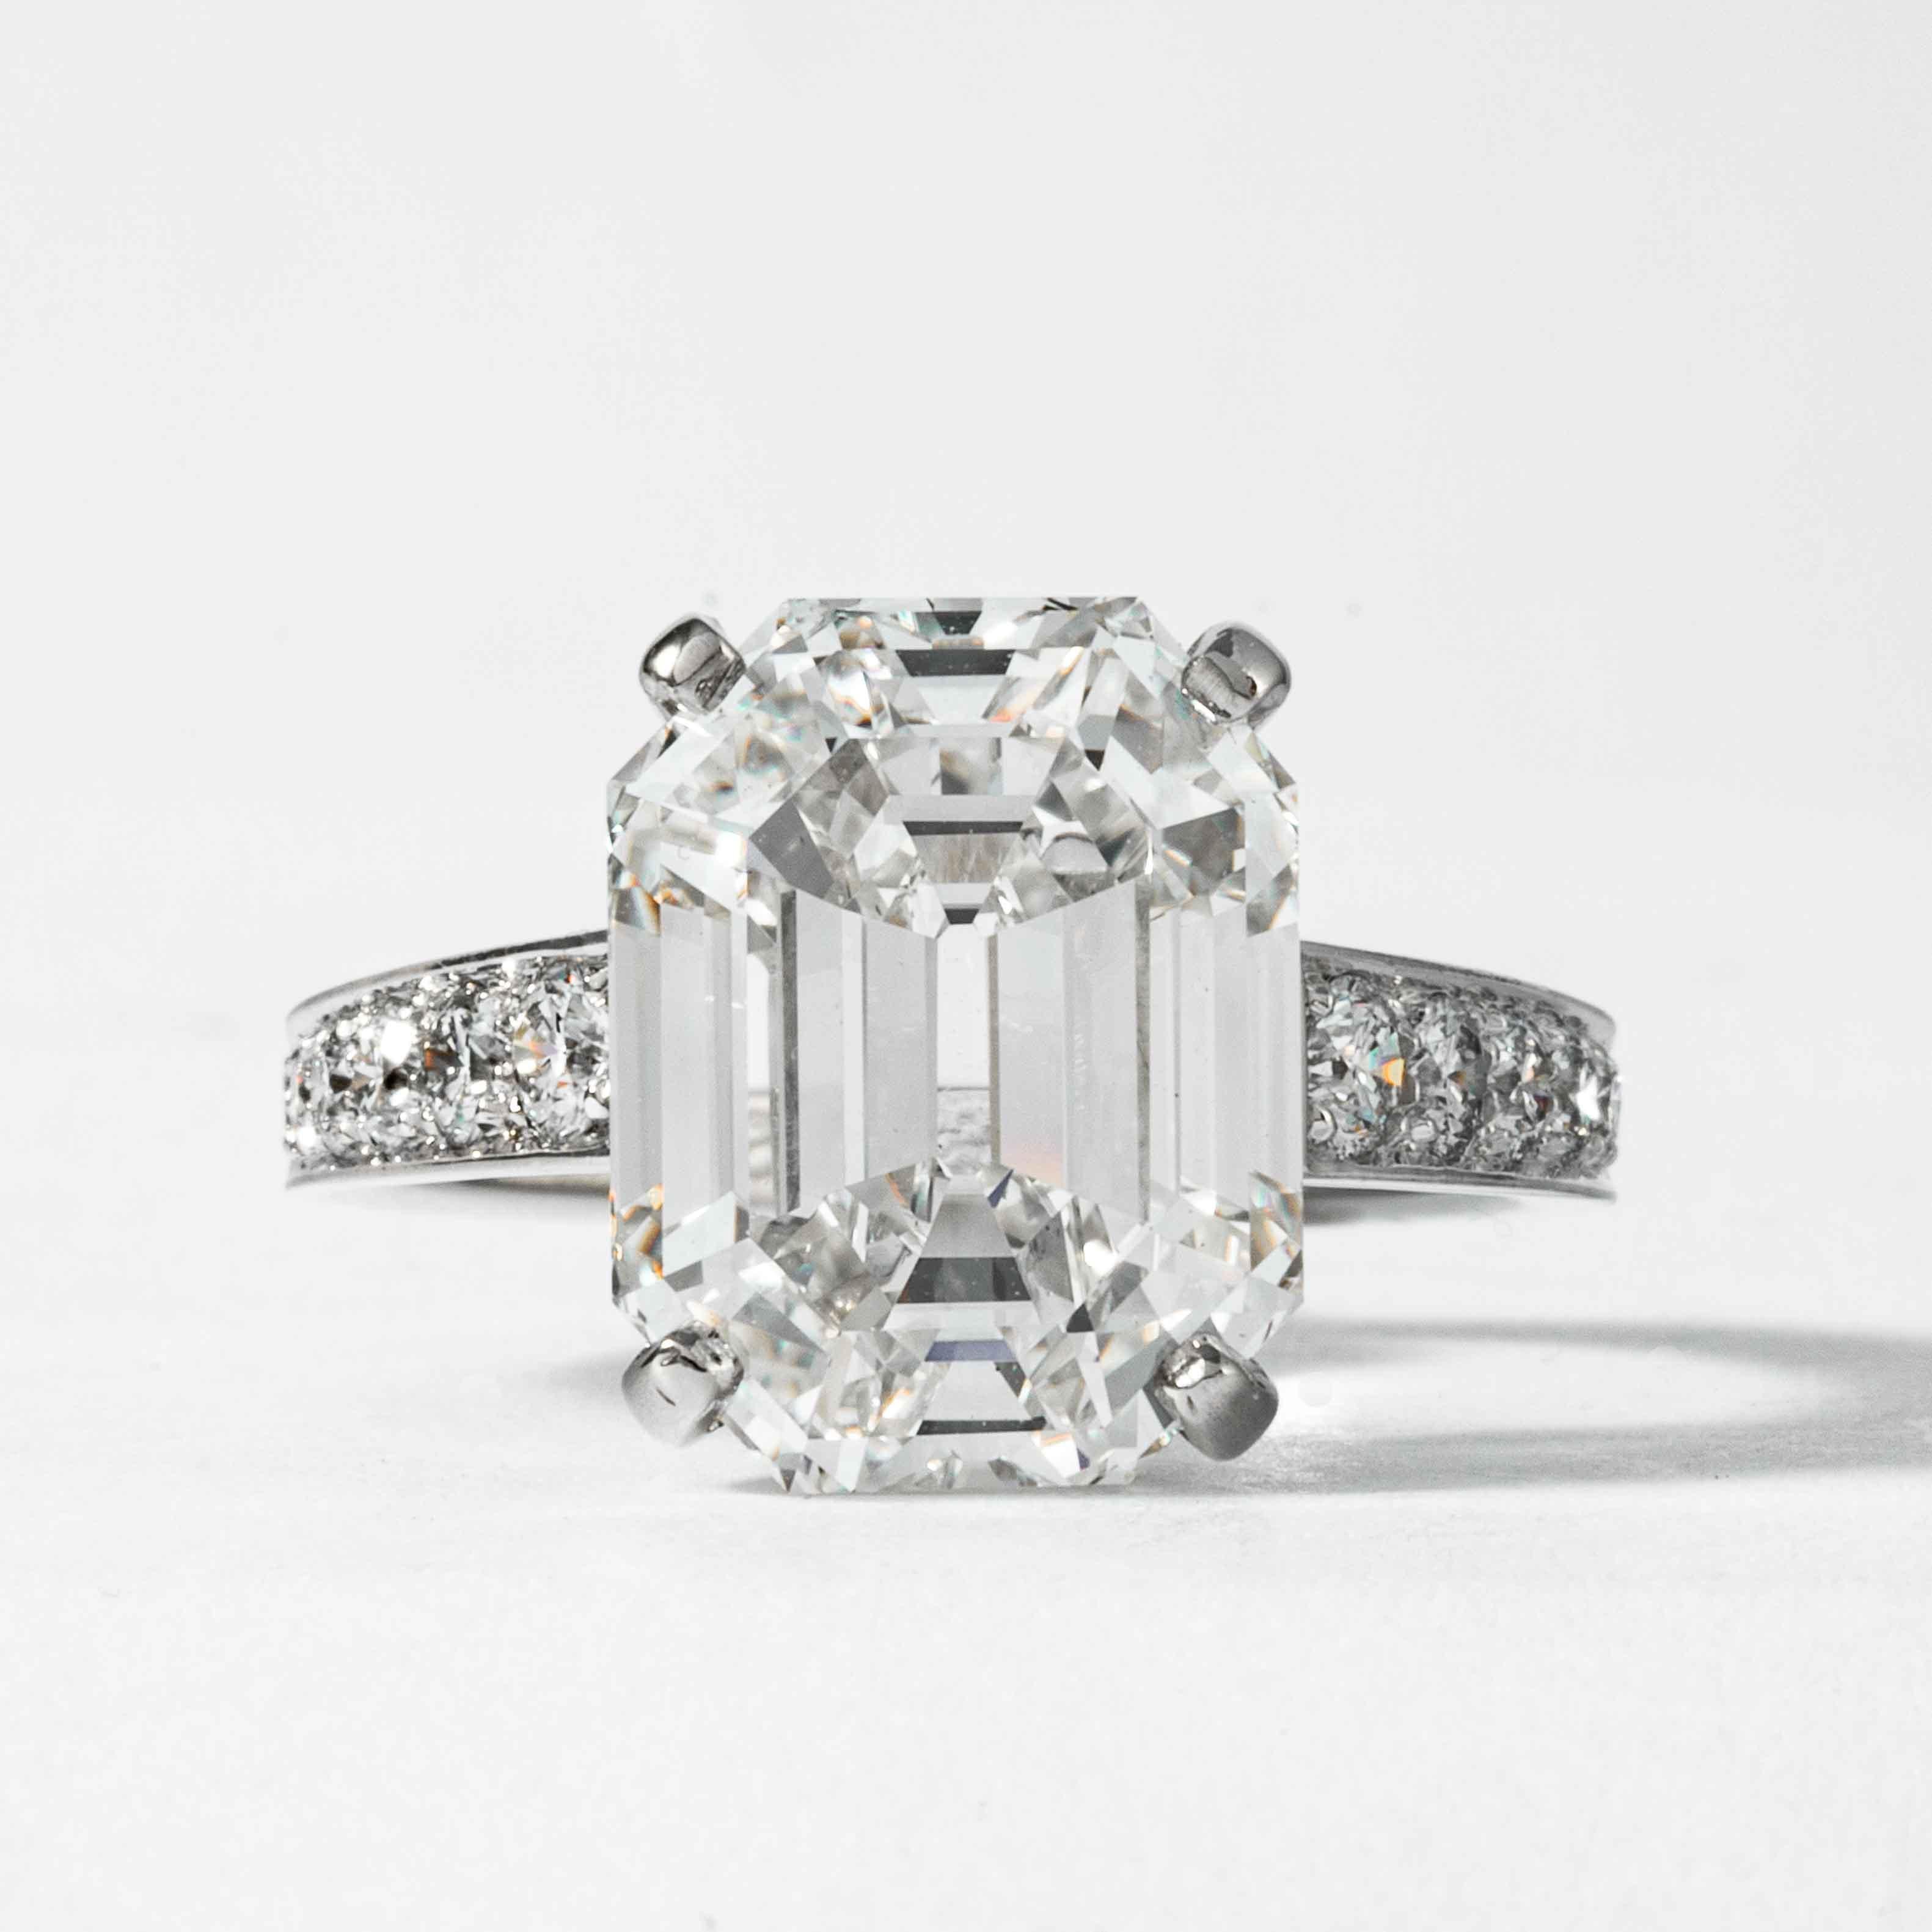 This diamond ring is offered by Shreve, Crump & Low. This 10.19 carat GIA Certified H VS2 emerald cut diamond measuring 14.18 x 10.93 x 7.44 mm is custom set in a handcrafted Shreve, Crump & Low platinum solitaire ring. The 10.19 carat emerald cut